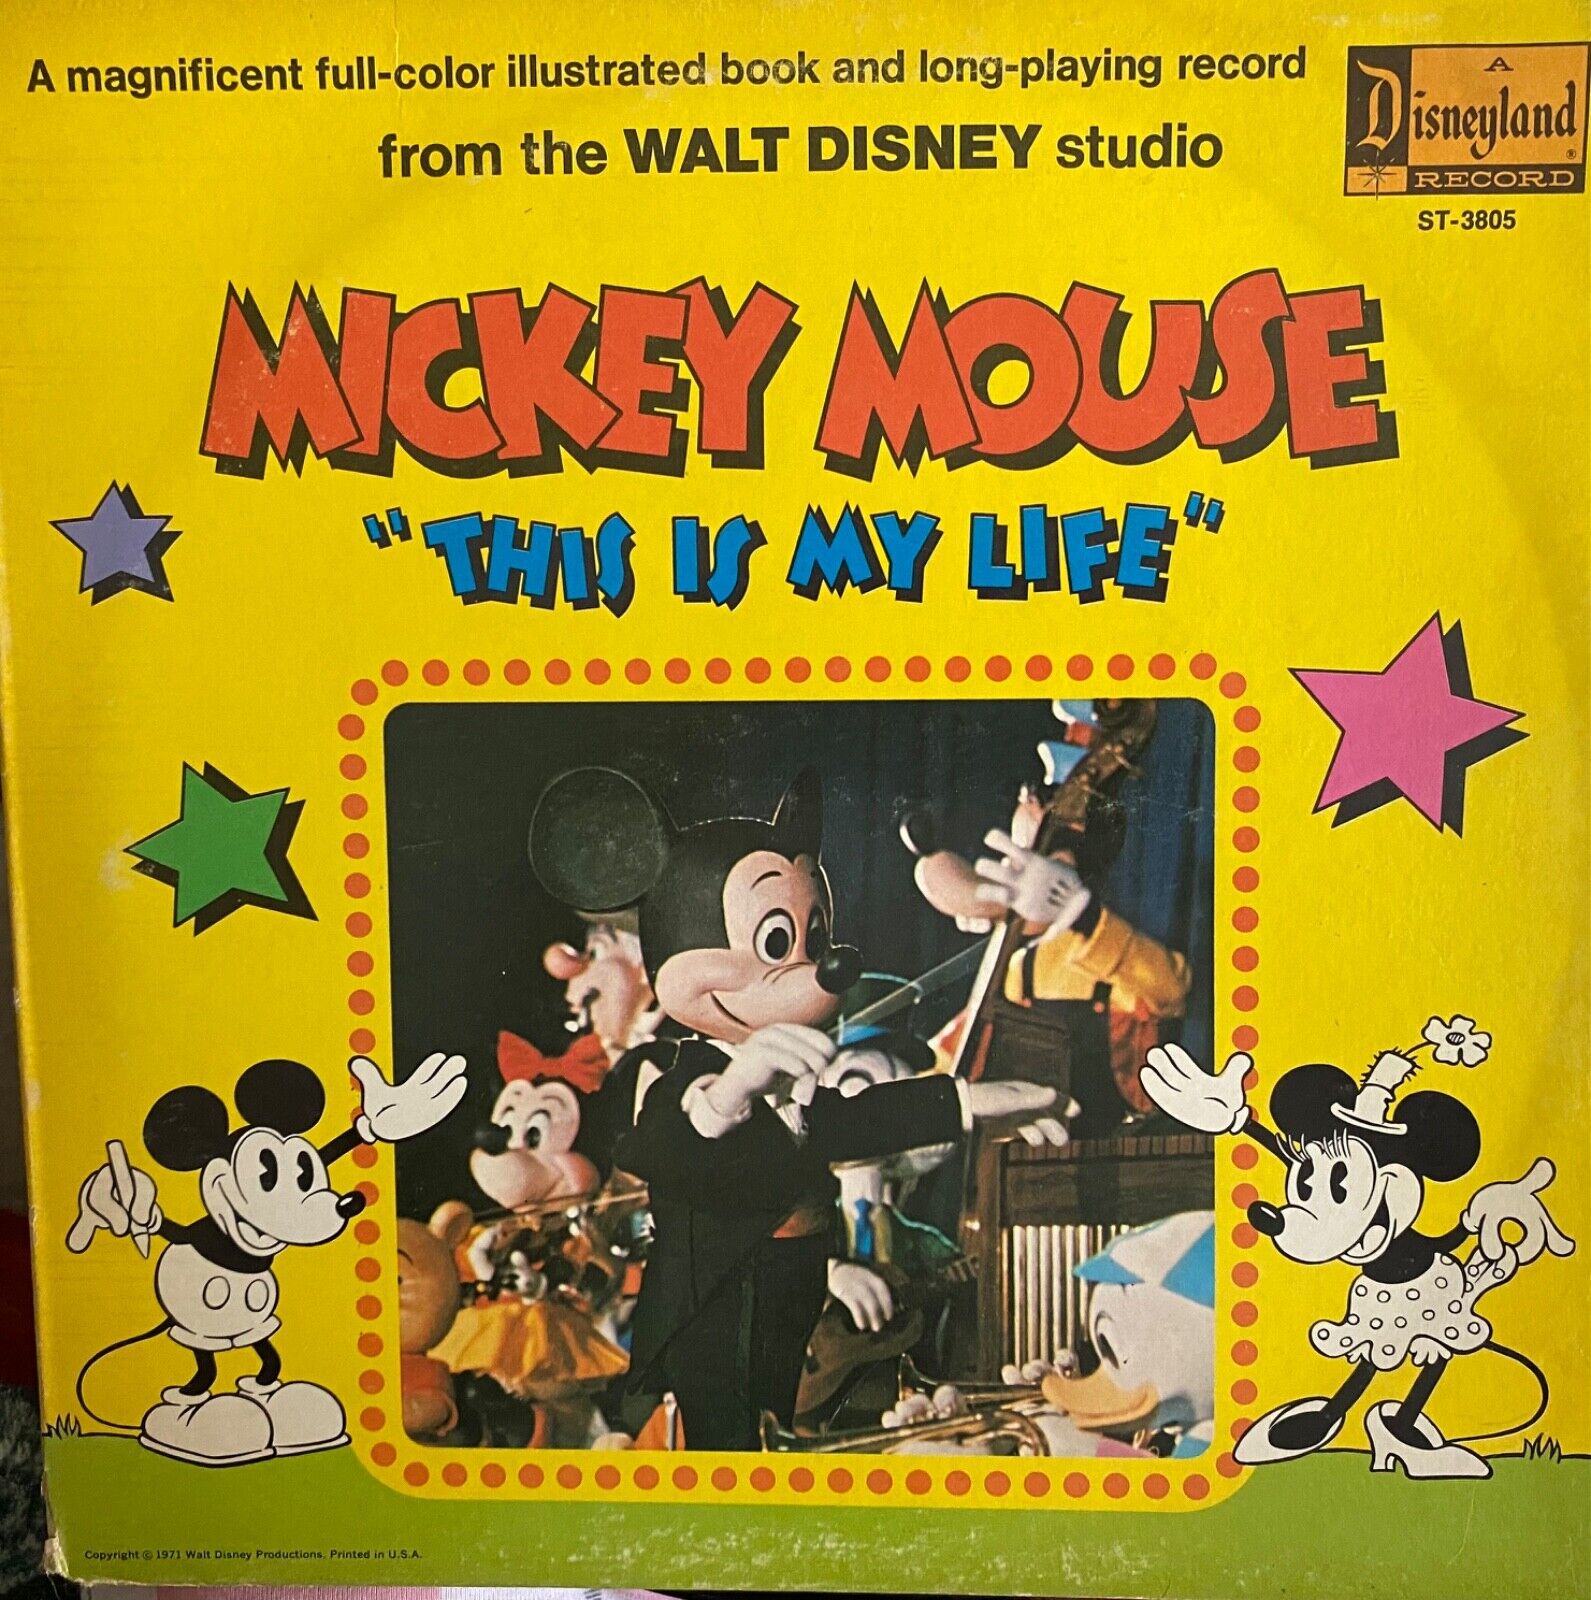 VINTAGE Mickey Mouse This Is My Life 1971 Disneyland Records Vinyl LP ST 3805